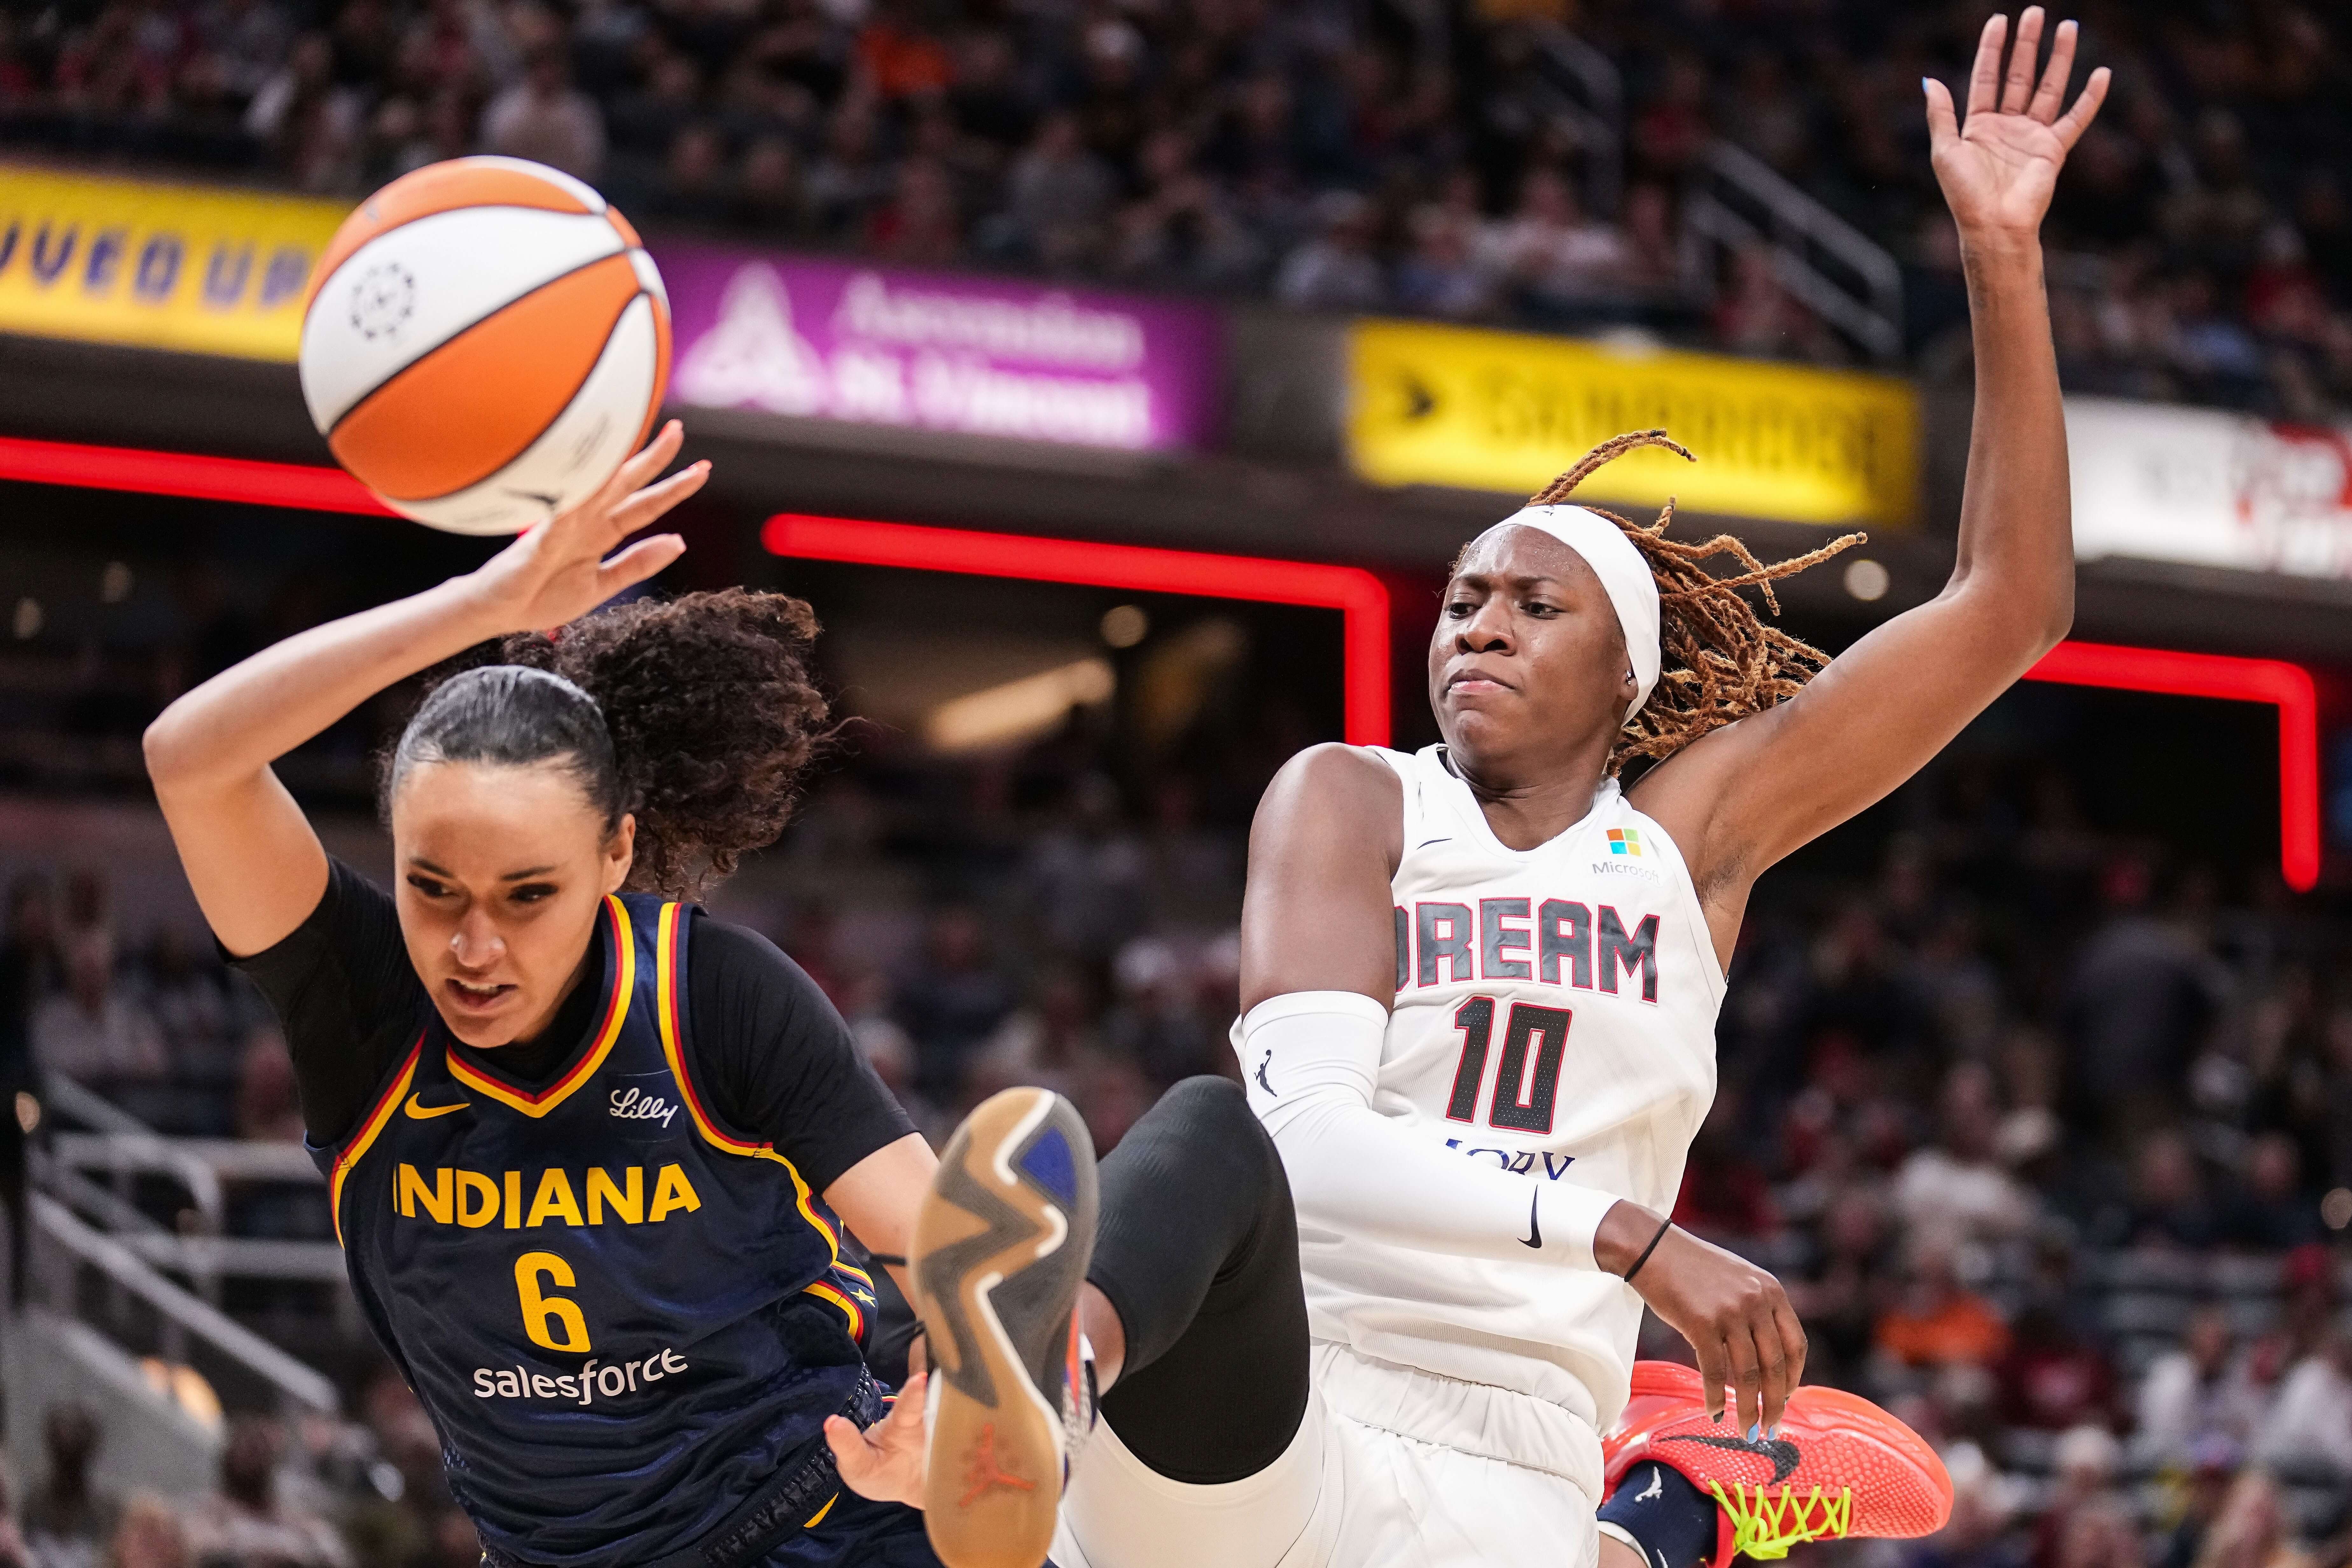 How To Bet - Dream vs Mercury Predictions, Picks, Odds for Tonight’s WNBA Game 